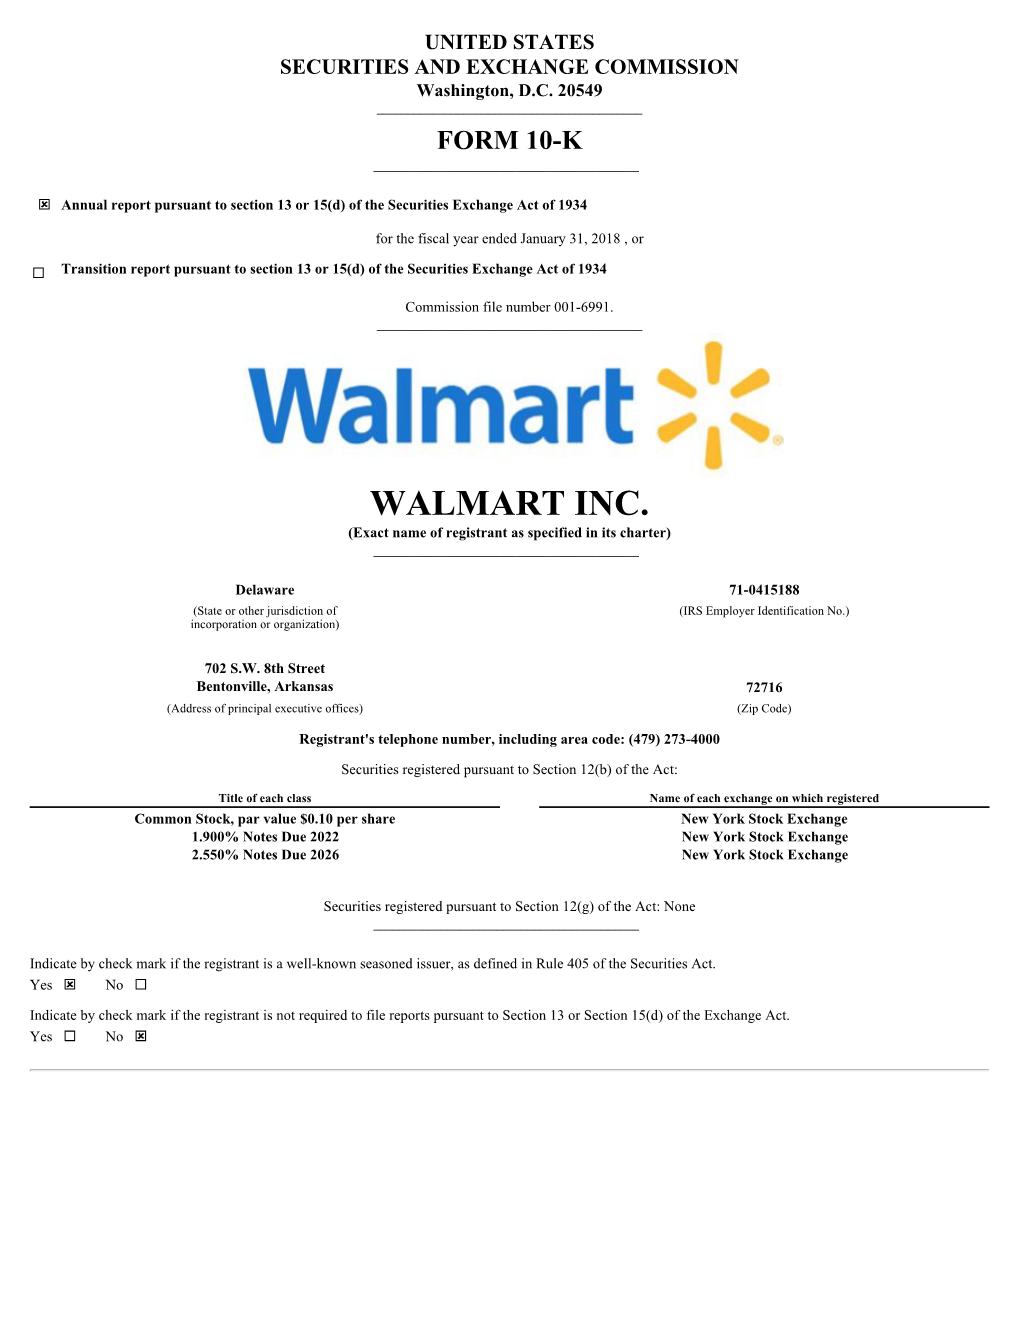 WALMART INC. (Exact Name of Registrant As Specified in Its Charter) ______